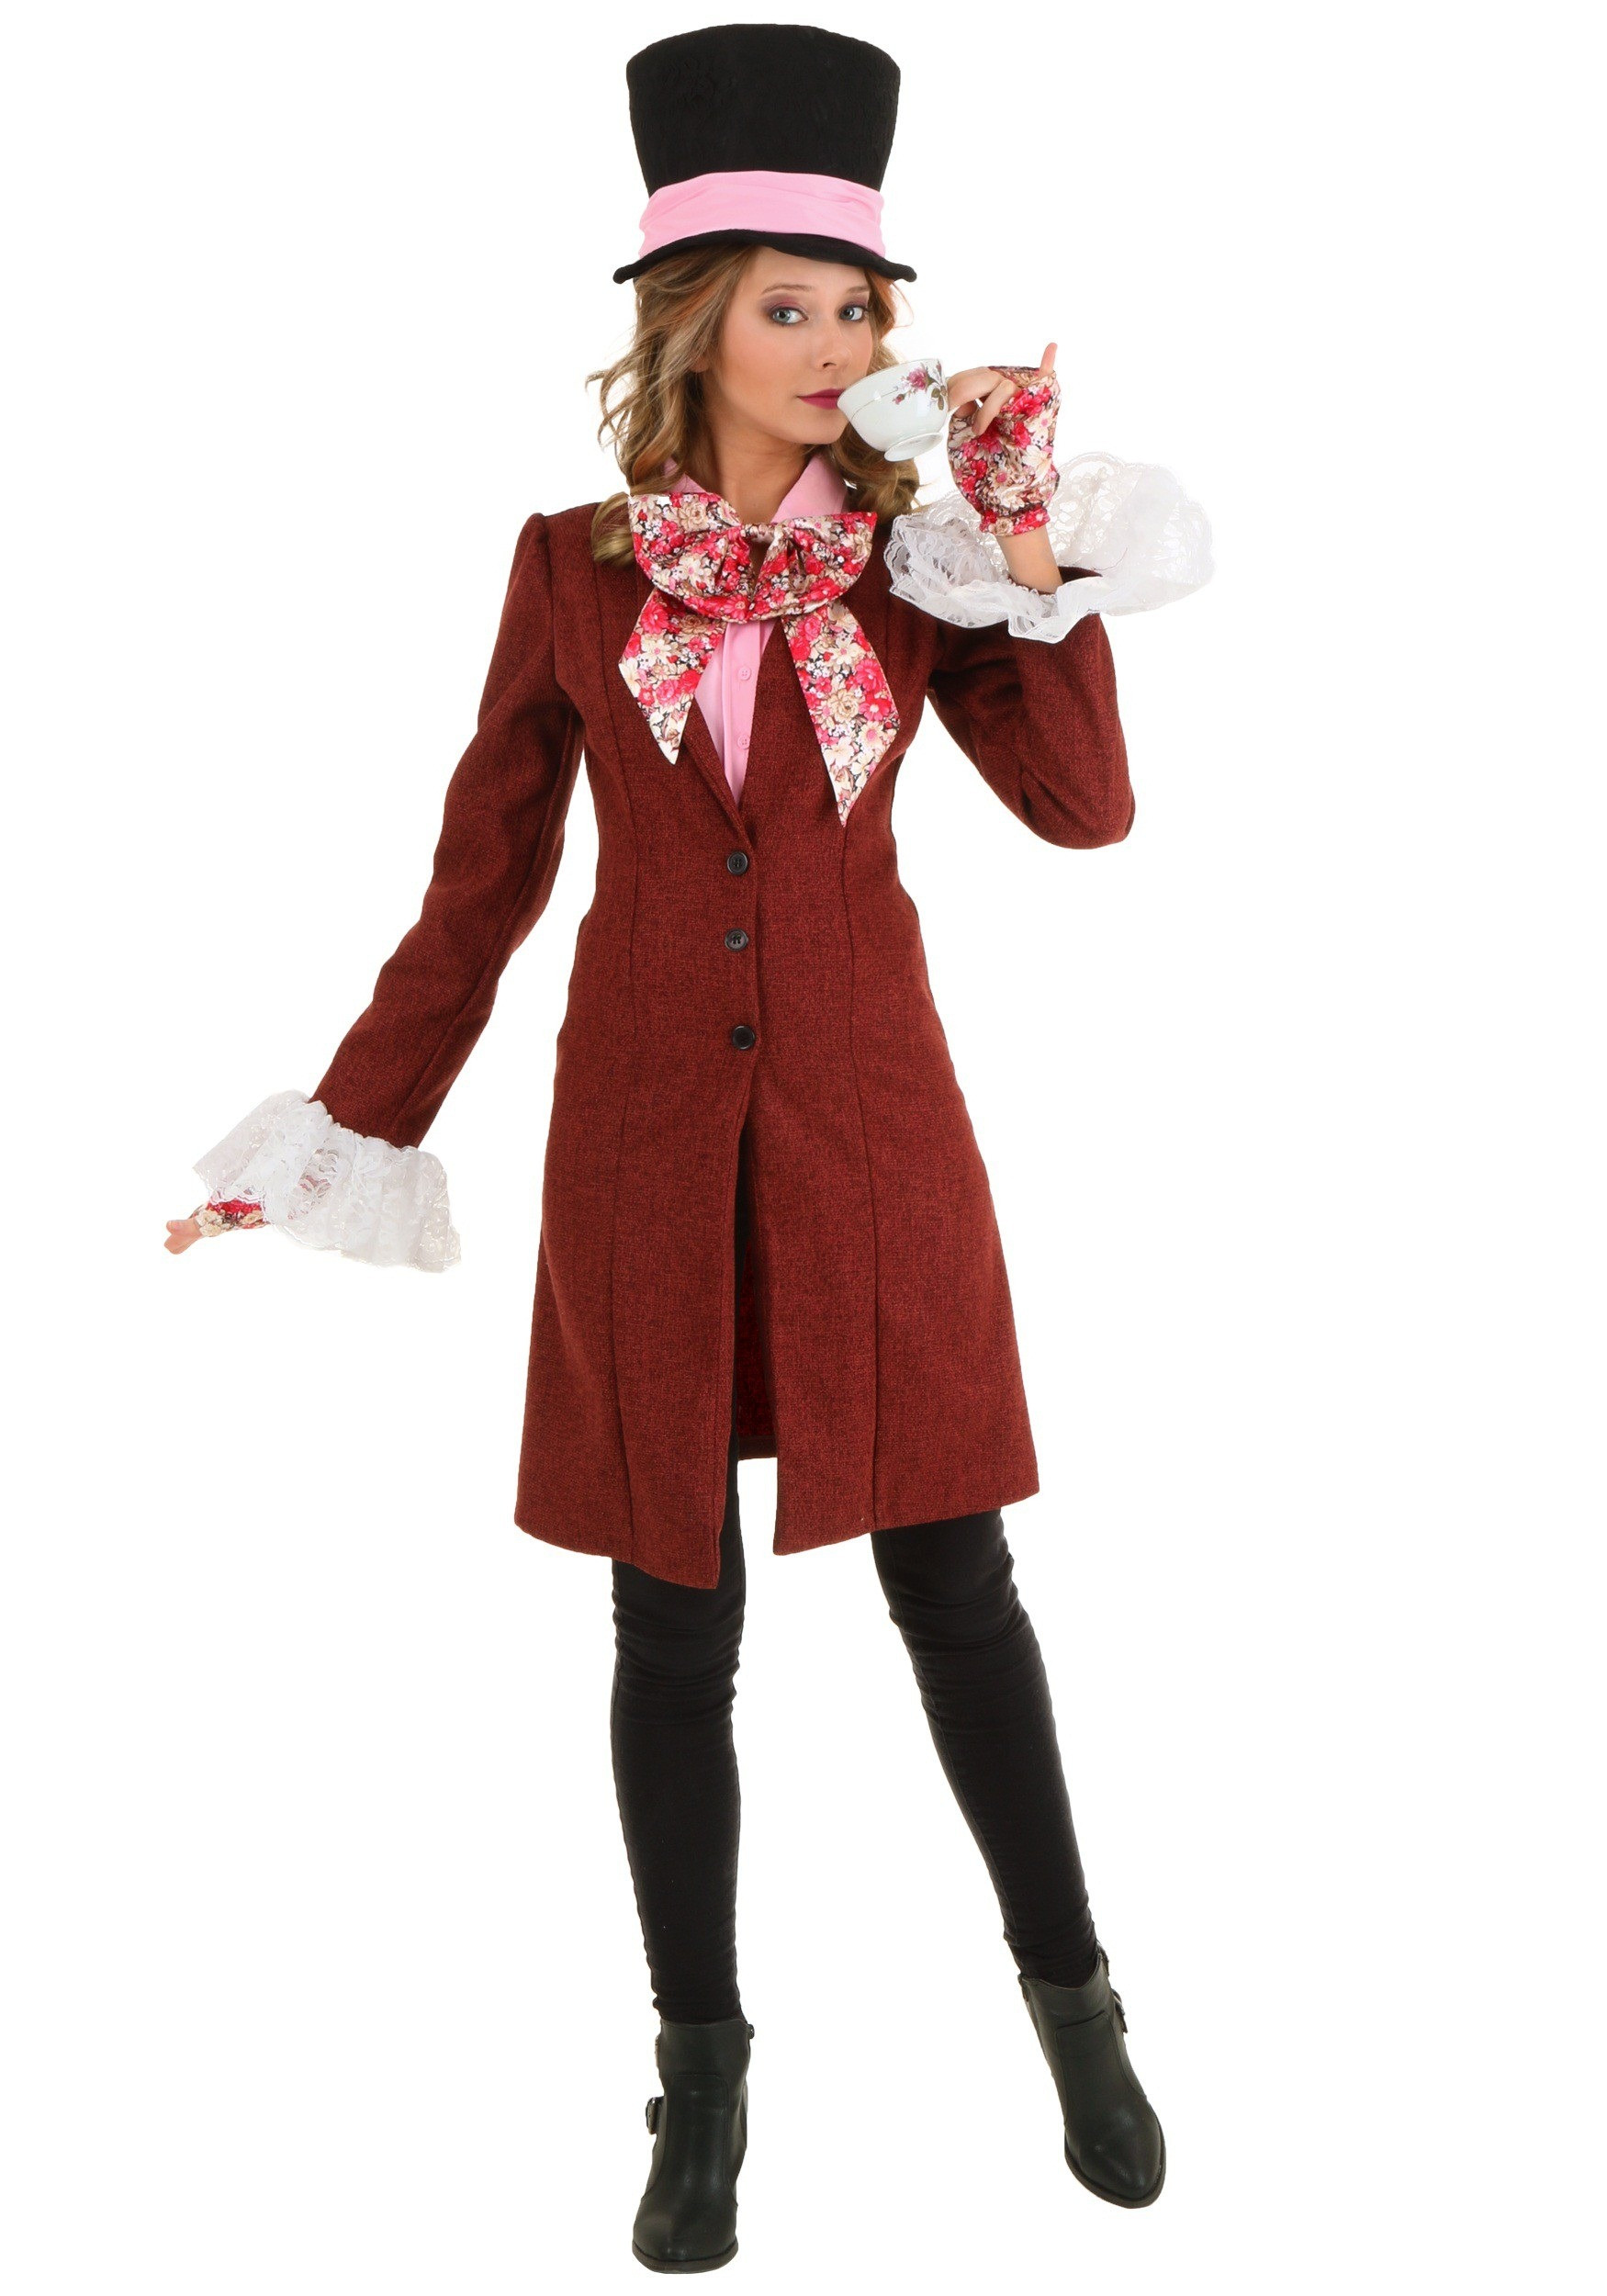 Tea Party Costume Ideas
 Deluxe Women s Mad Hatter Costume